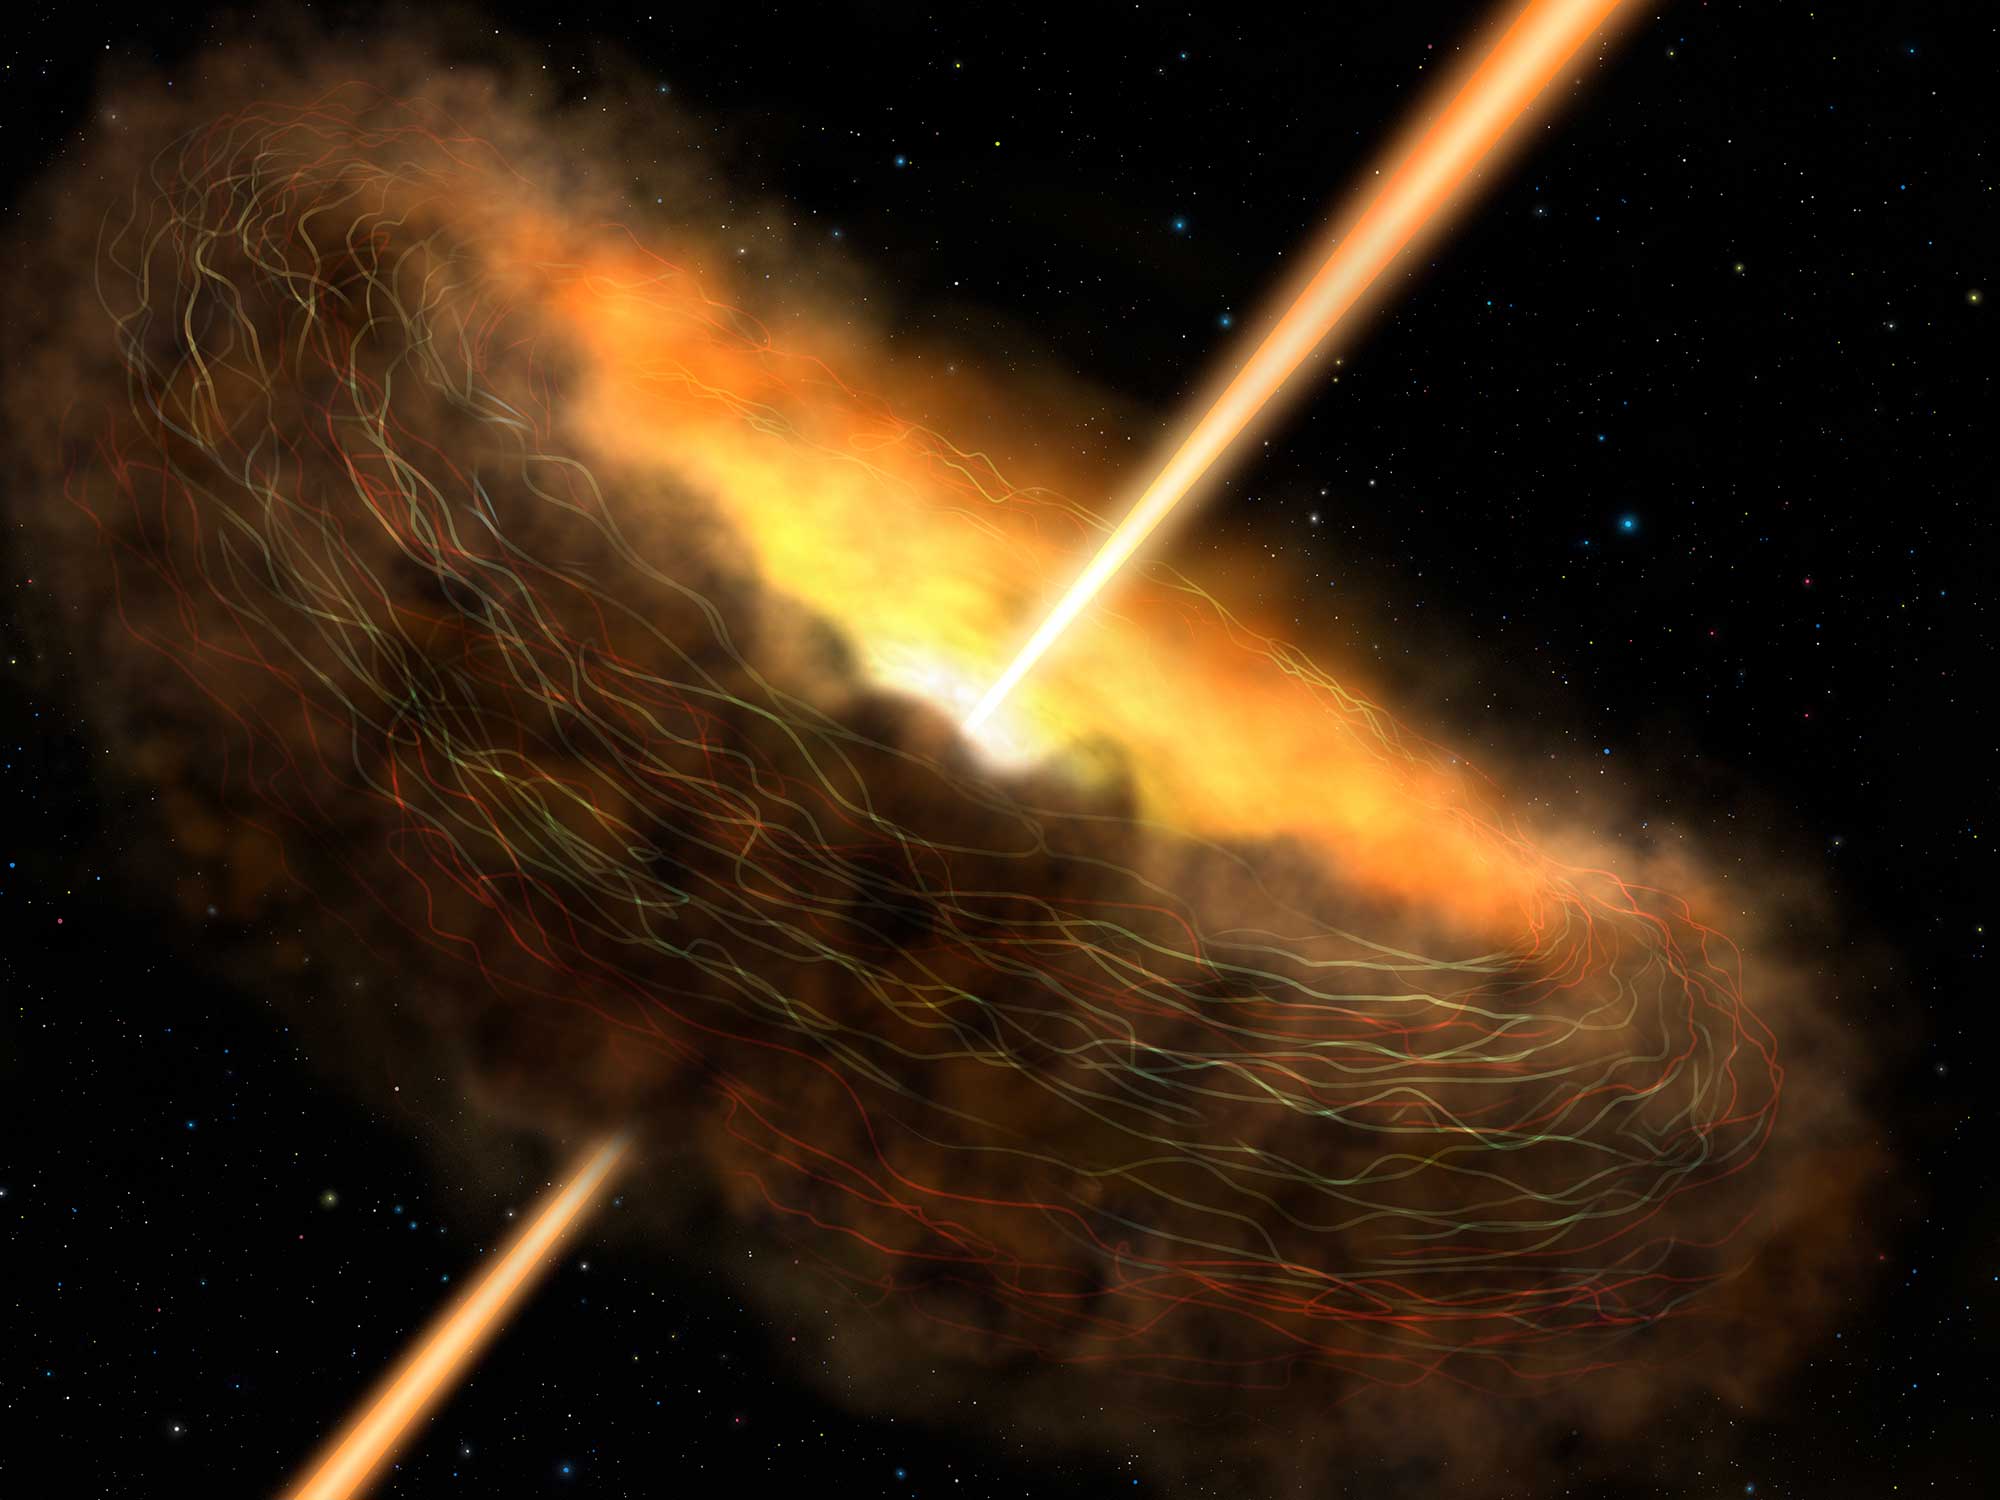 Artist’s conception of the core of Cygnus A, including the dusty donut-shaped surroundings, called a torus, and jets launching from its center. Magnetic fields are illustrated trapping the dust in the torus. These magnetic fields could be helping power the black hole hidden in the galaxy’s core by confining the dust in the torus and keeping it close enough to be gobbled up by the hungry black hole. Credits: NASA/SOFIA/Lynette Cook